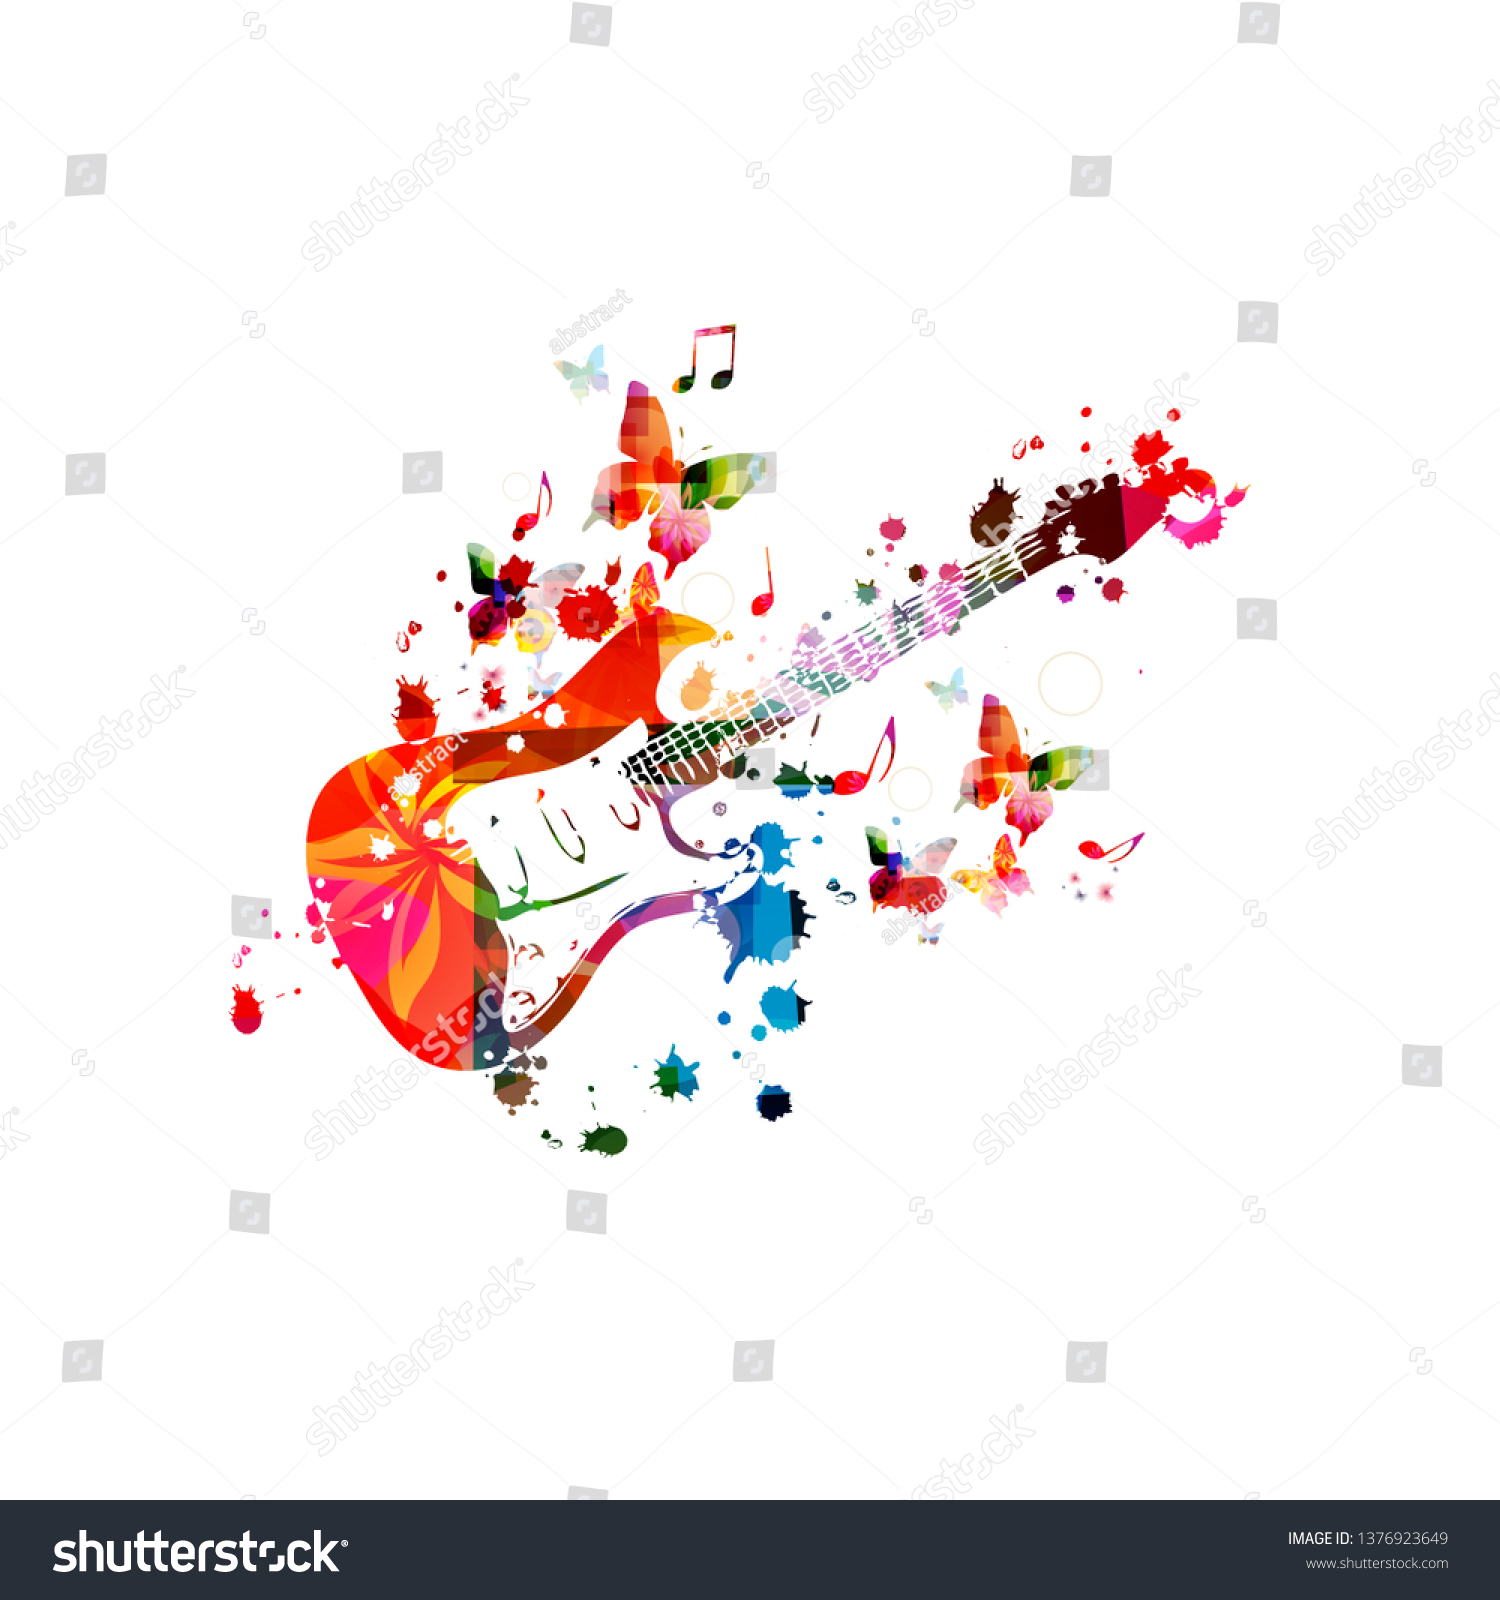 Colorful Electric Guitar Music Notes Isolated Stock Vector Royalty Free 1376923649 - num num num song roblox band